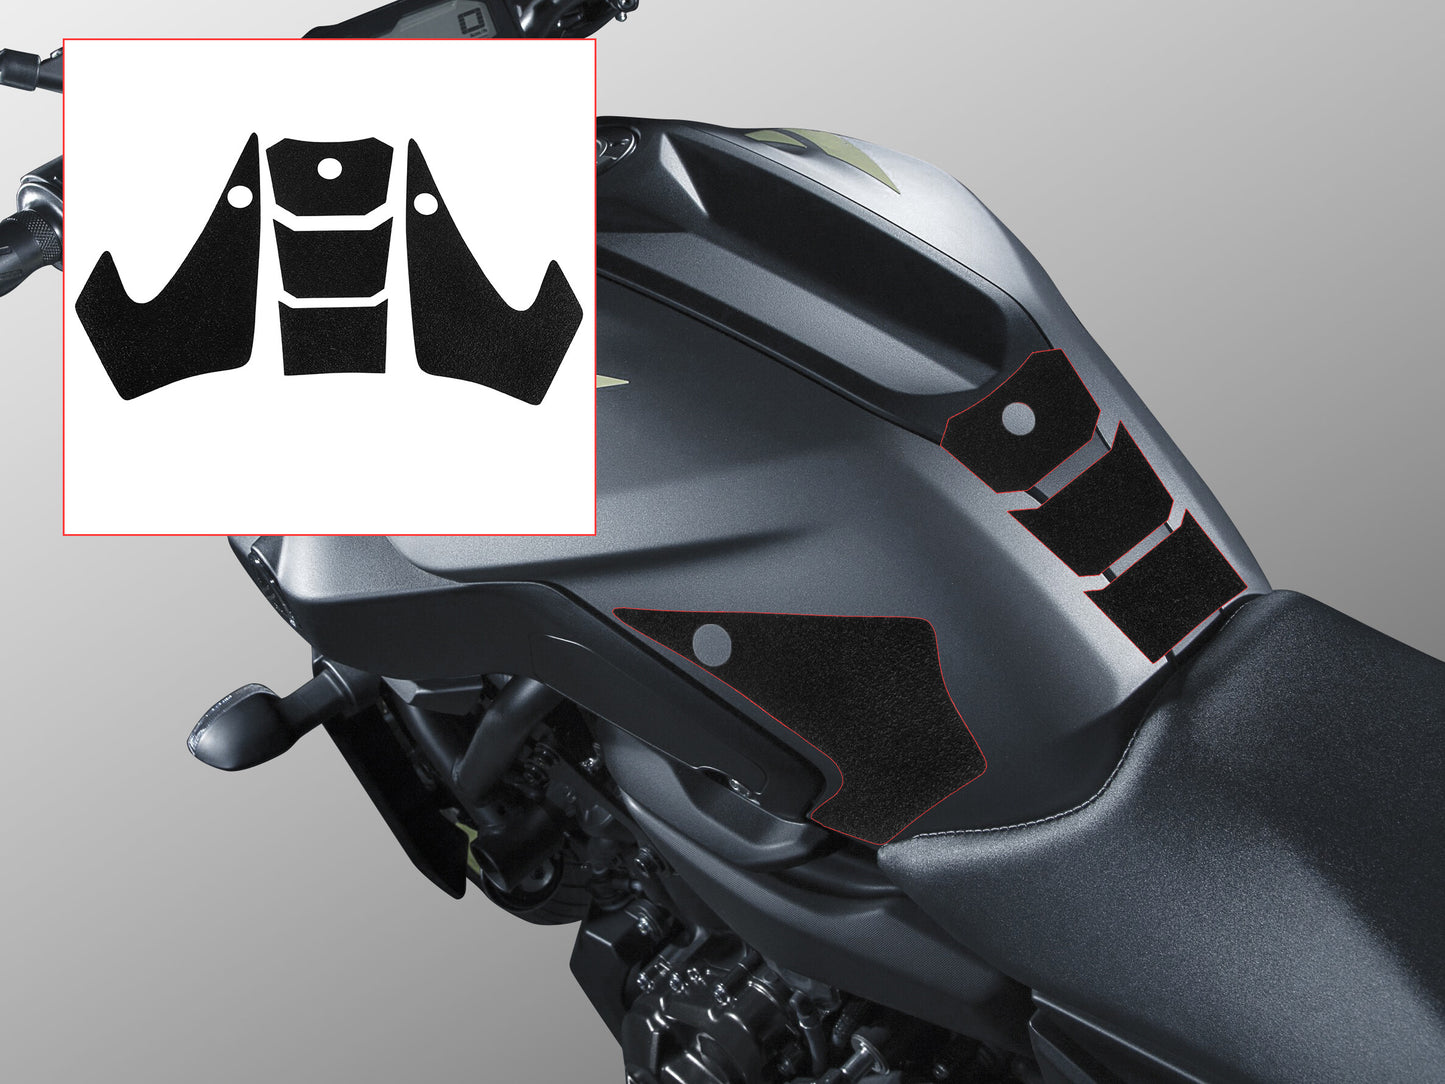 Wolfline Motorcycle Anti Slip Tank Pad Stickers Side Gas Tank Pad Knee Grip Decals Protection For Yamaha MT07 MT 07 2014 2015 2016 2017 2018 2019 2020